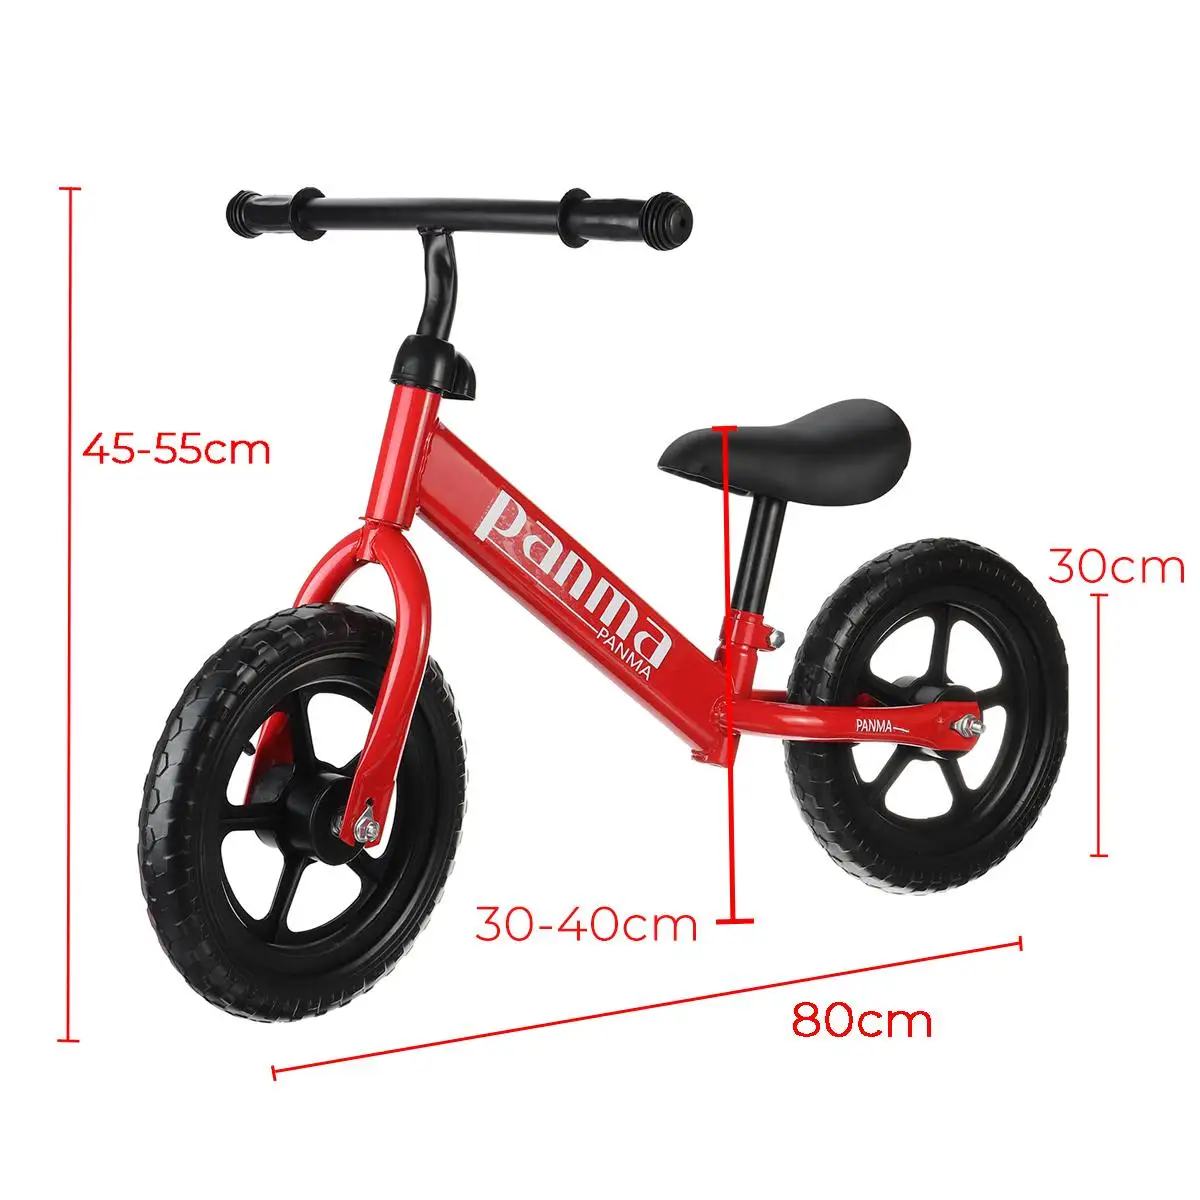 

12 Inch Baby Balance Bike Walker Kids Ride On Toy for 2-6 Years Old Children for Learning Walk Two Wheel Scooter No Foot Pedal